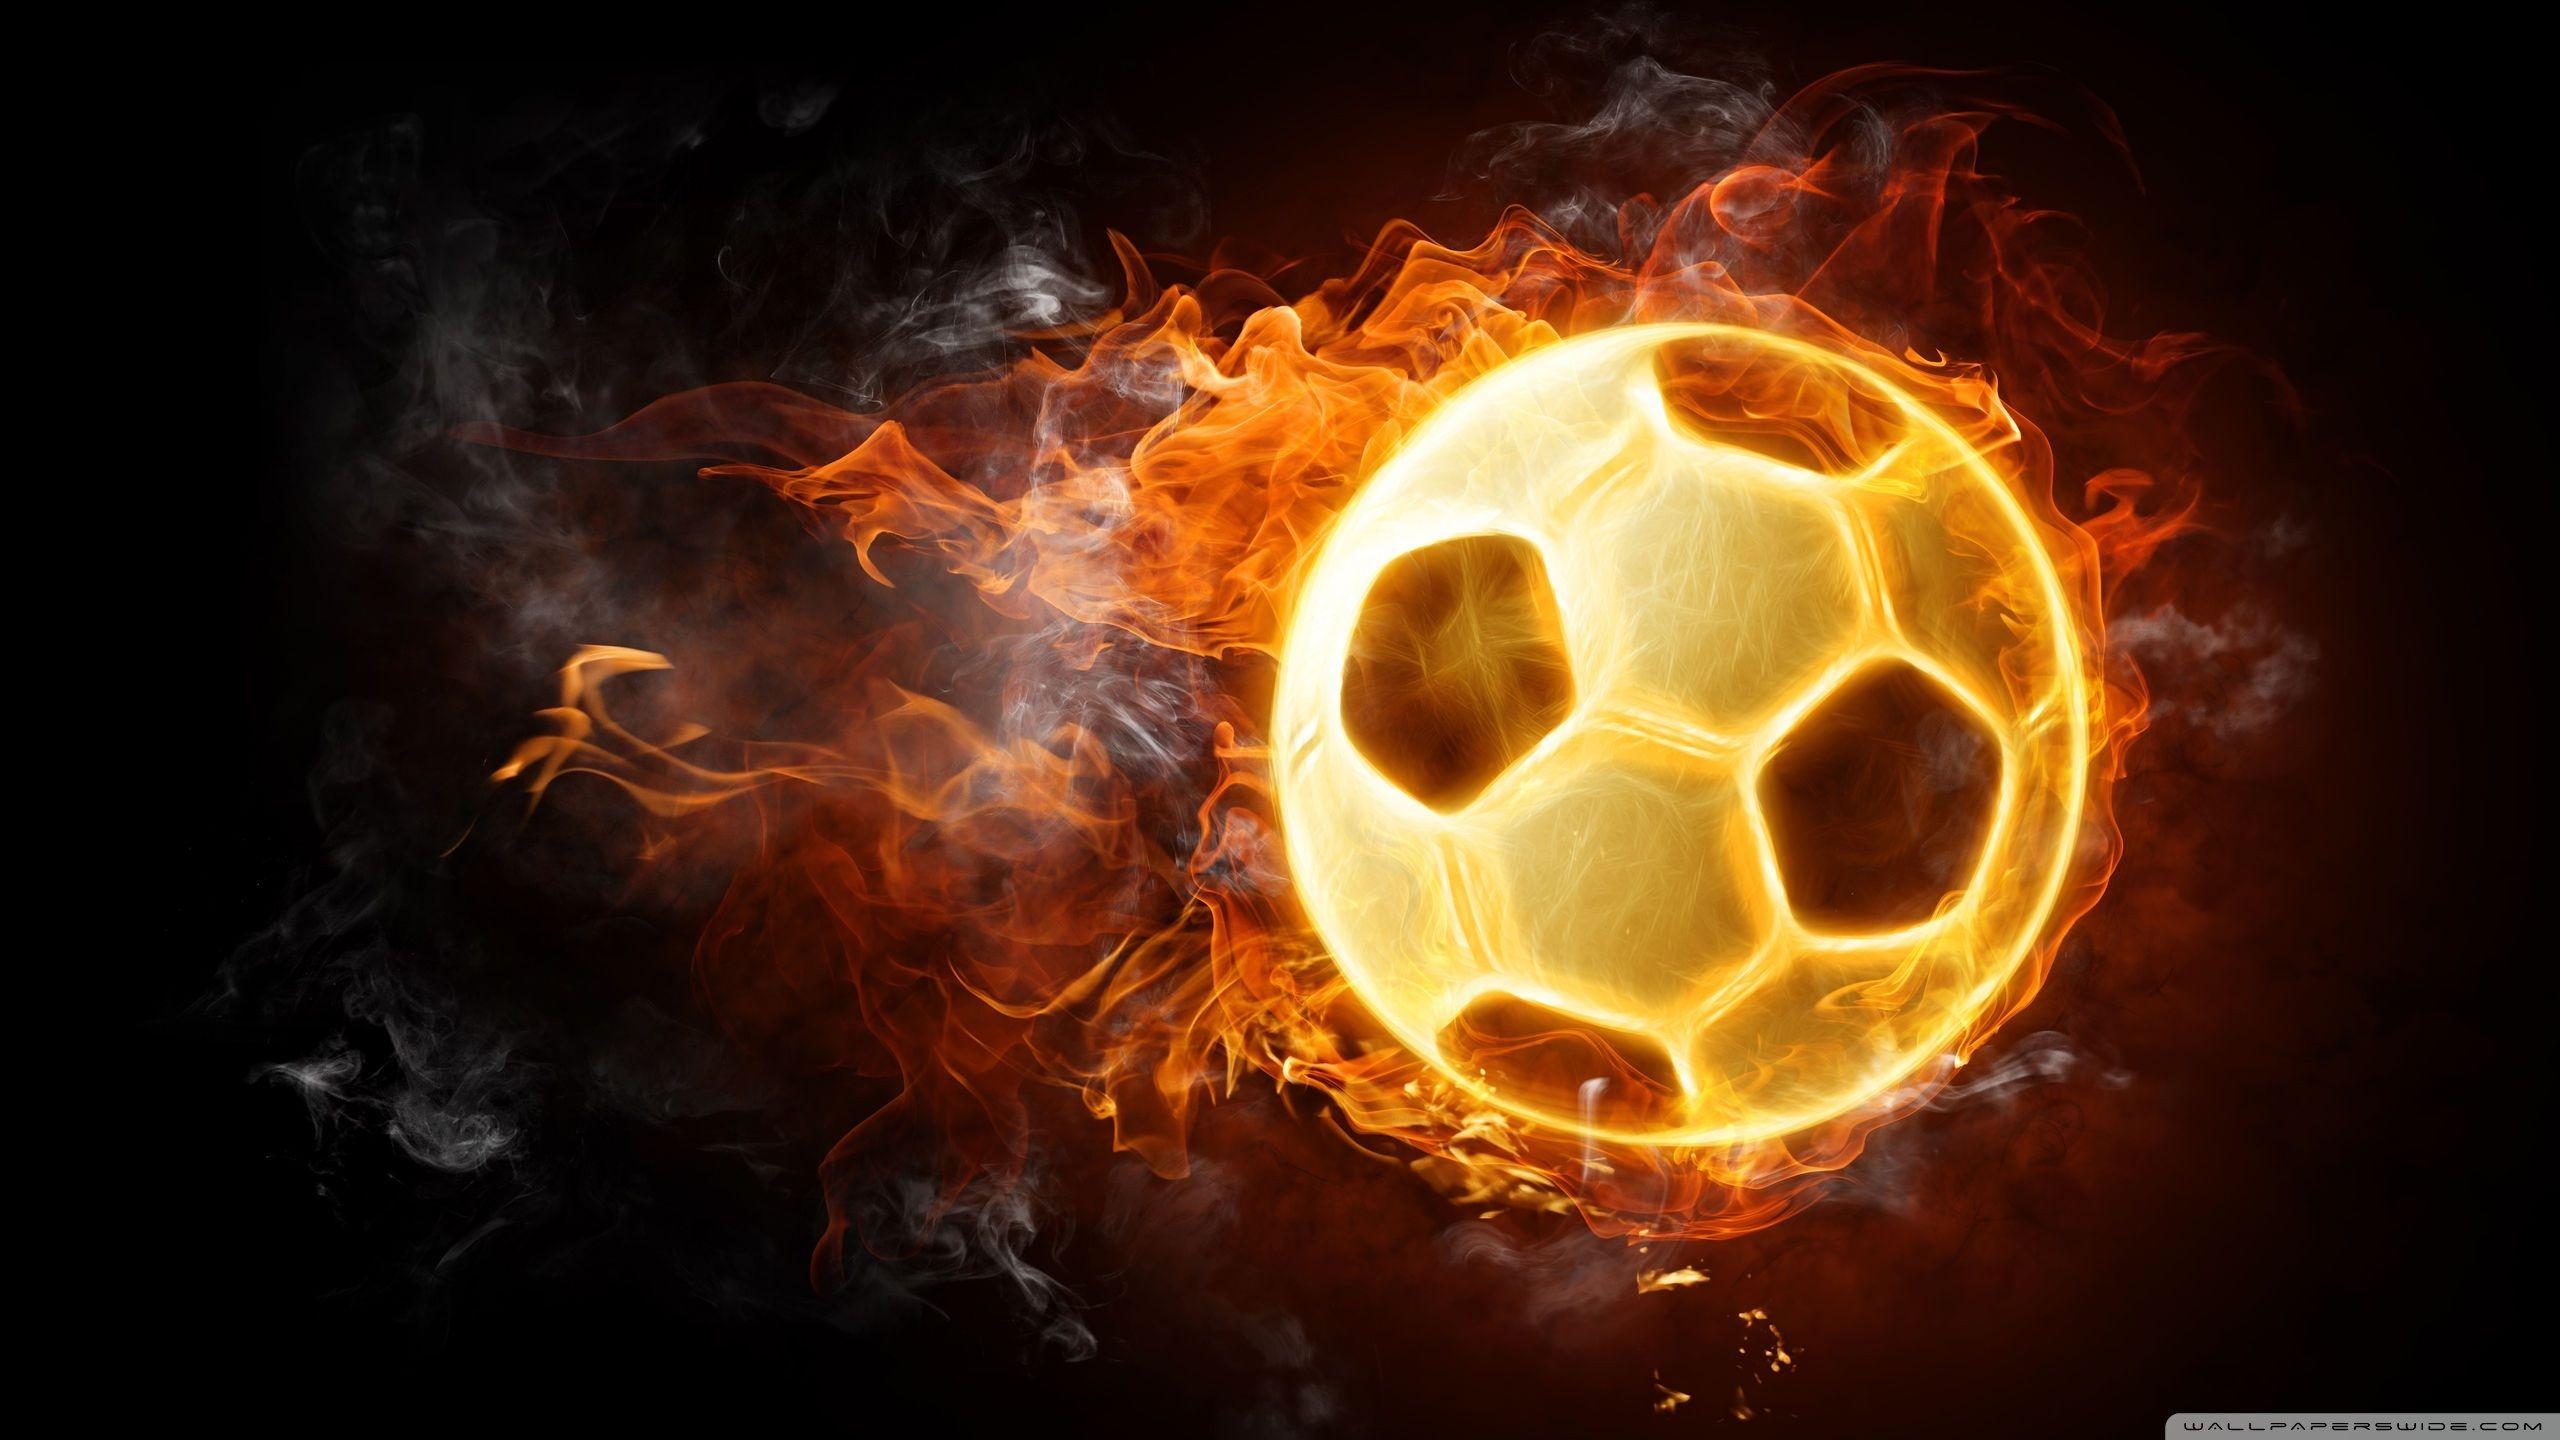 Soccer HD Wallpaper and Background Image